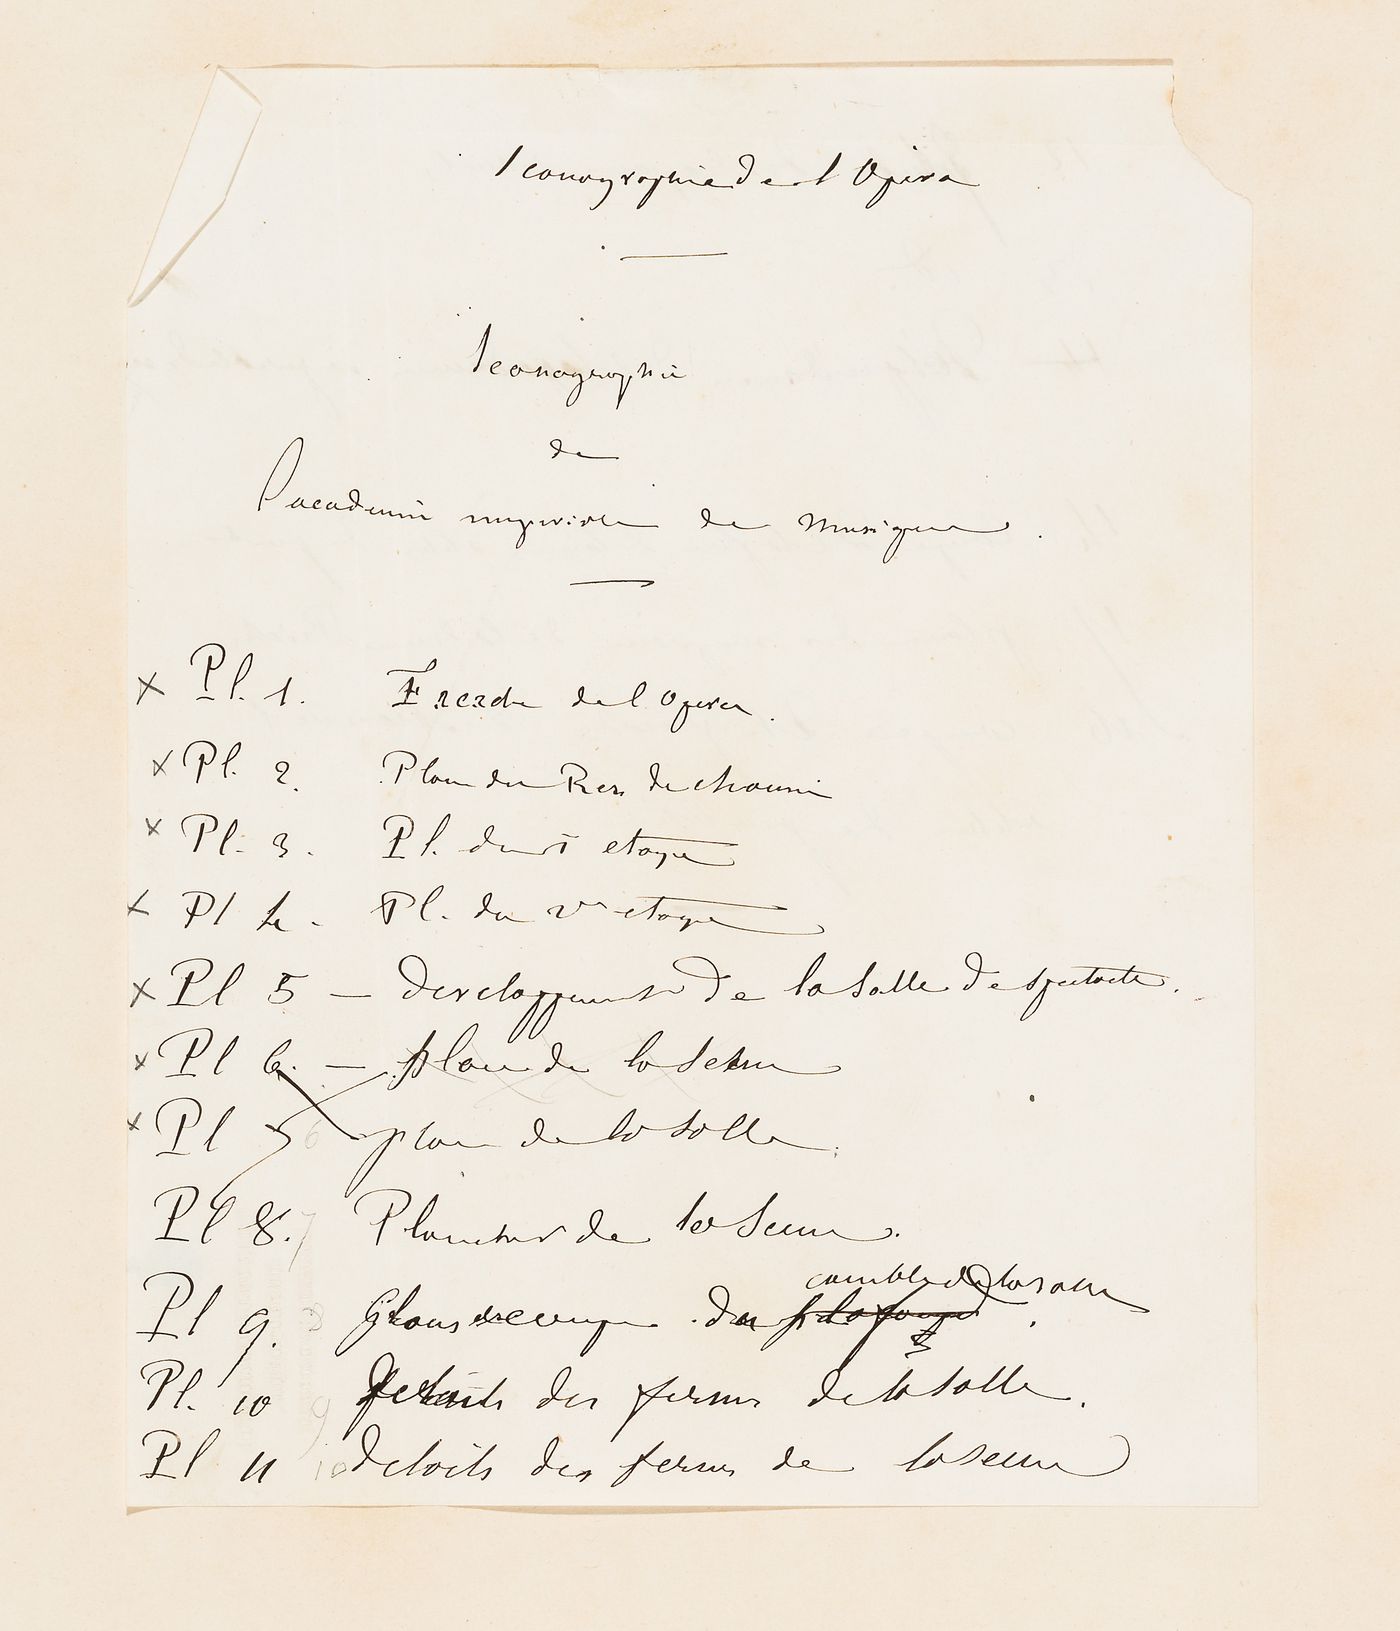 Table of contents for drawings and lithographs for proposed alterations, Salle Le Peletier